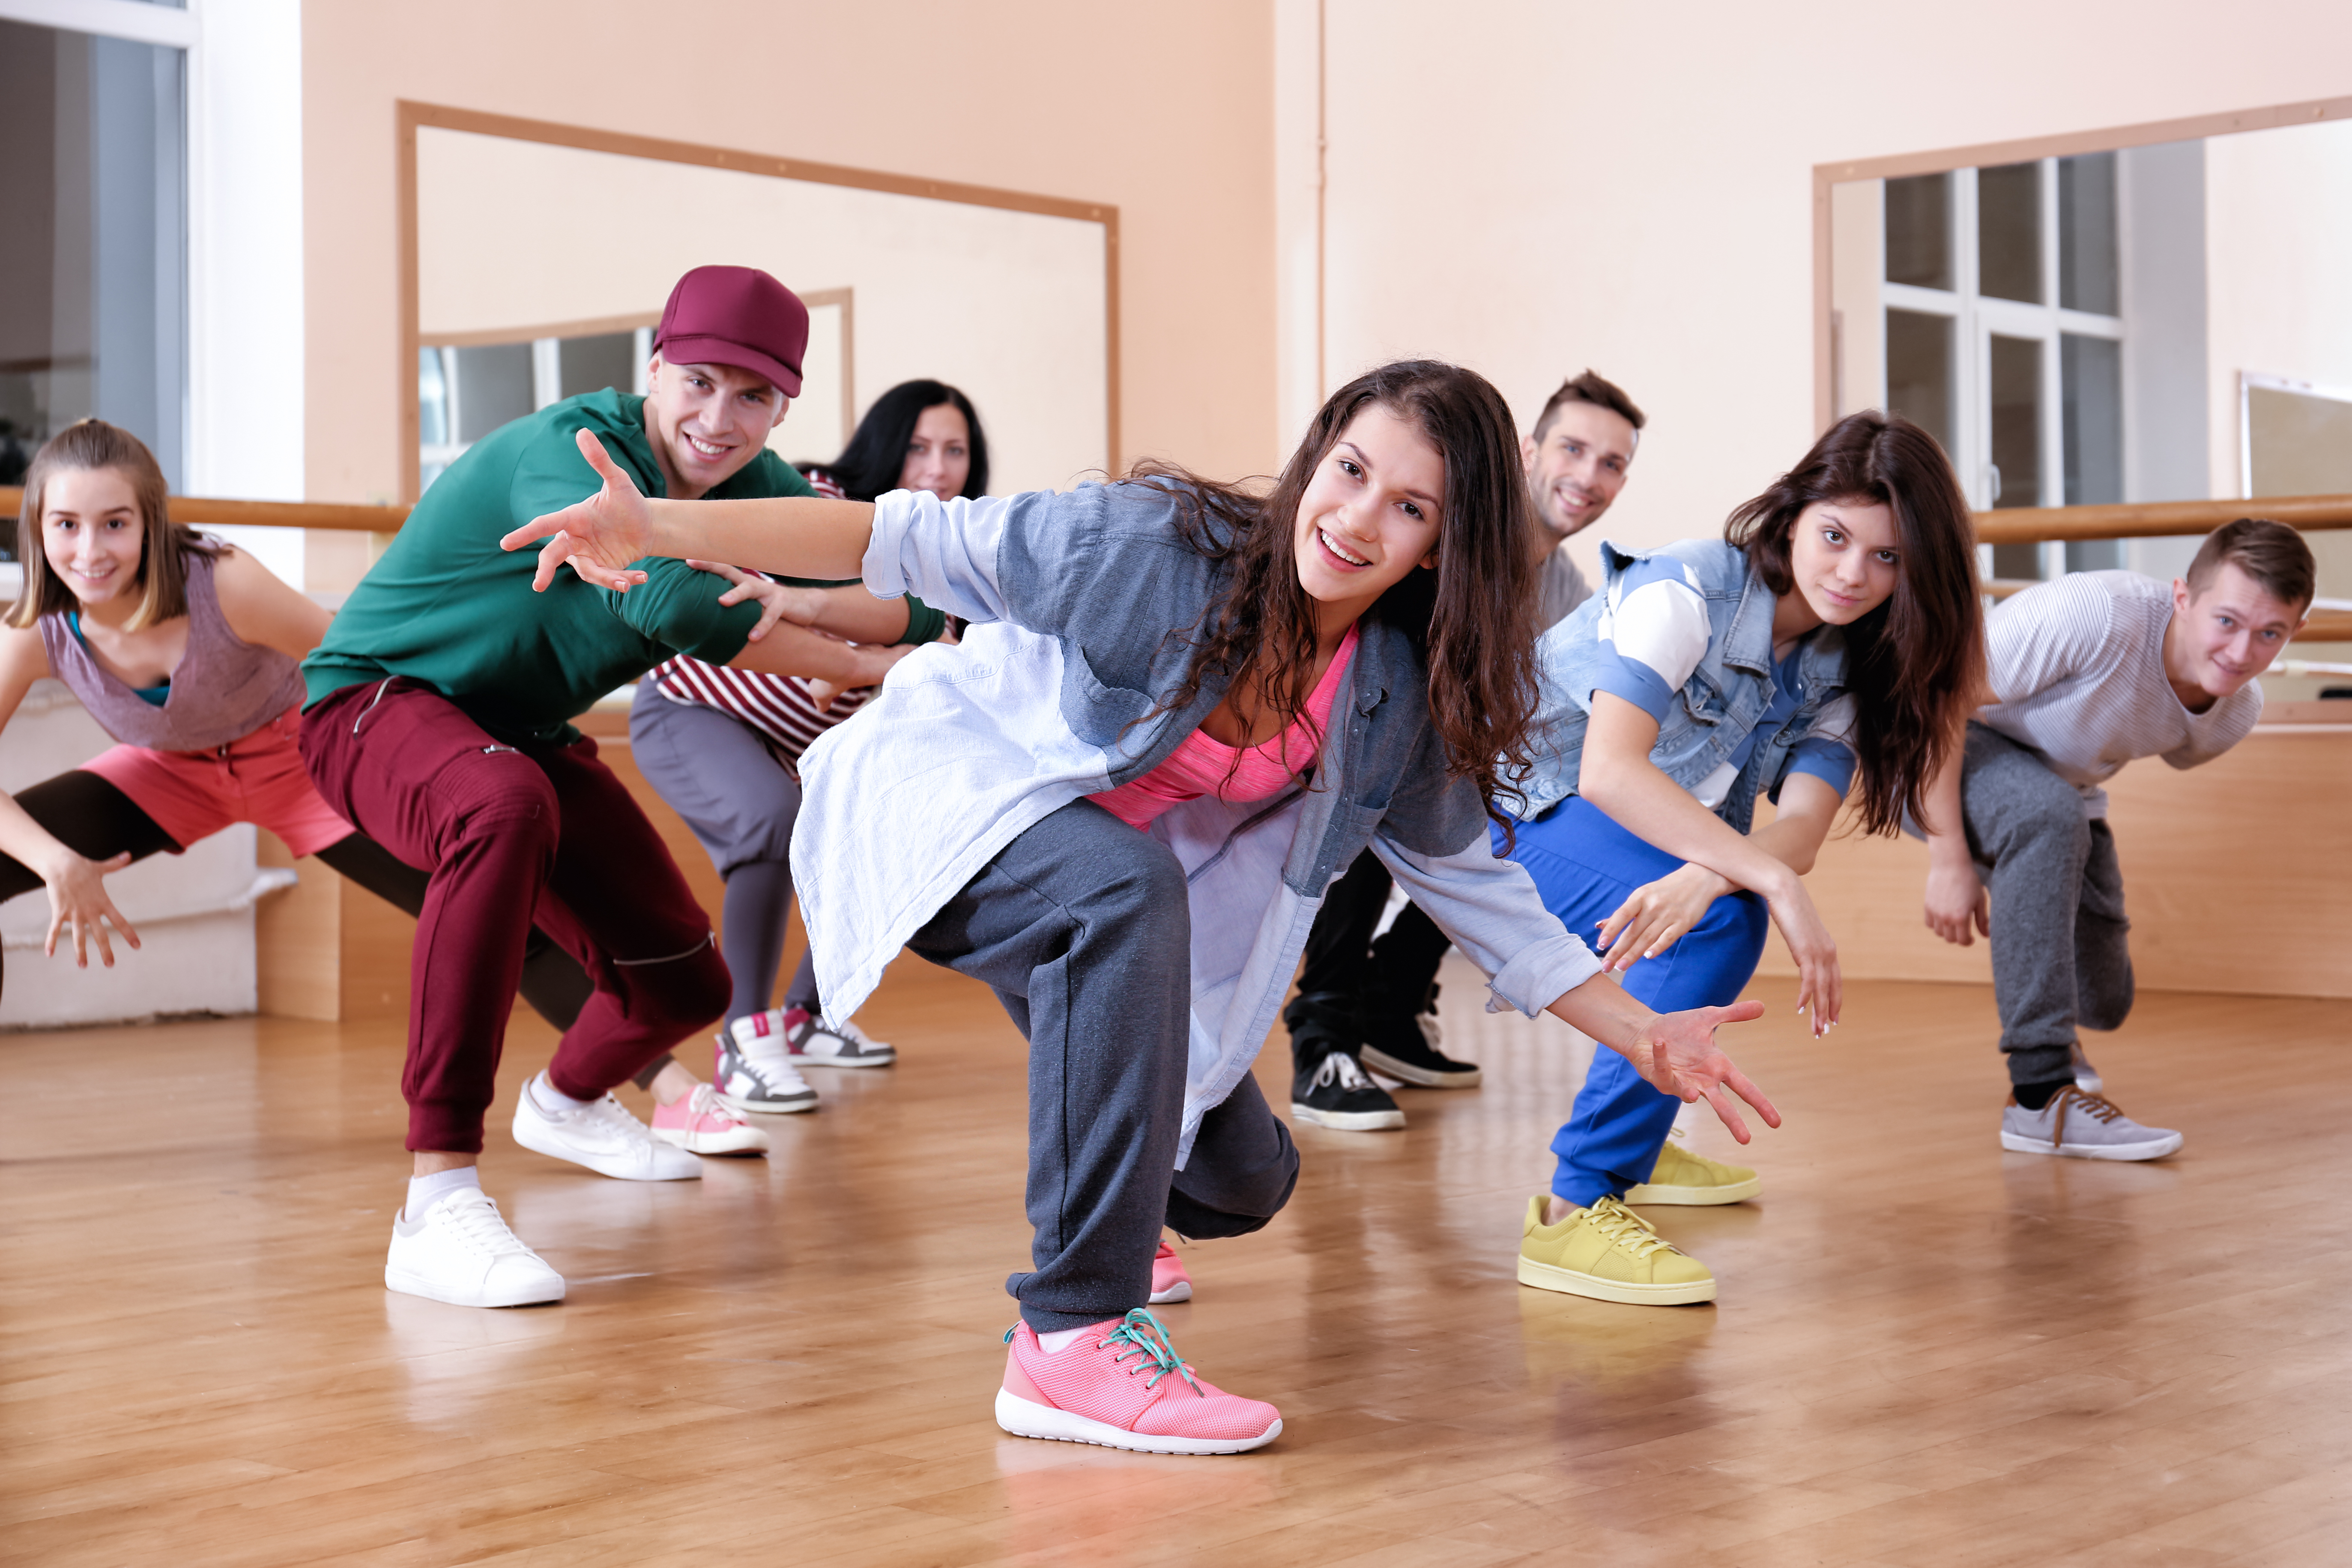 hip hop dance classes near me for 8 year olds